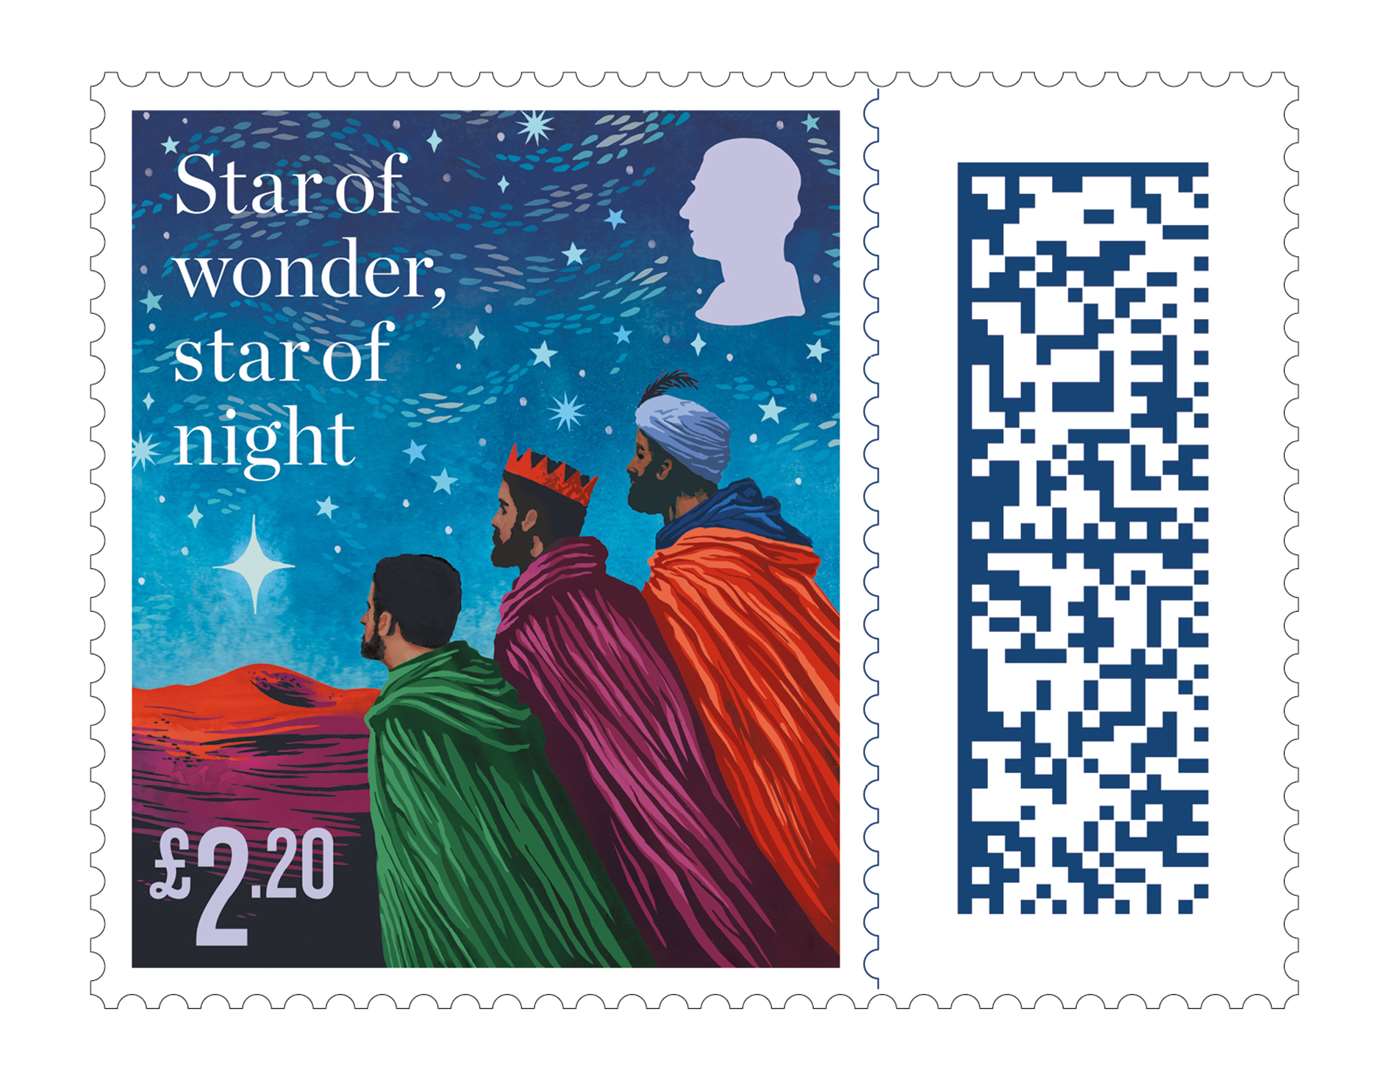 The stamps are inspired by traditional Christmas carols O Holy Night, O Little Town of Bethlehem, Silent Night, Away in a Manger, and We Three Kings (Royal Mail/PA)